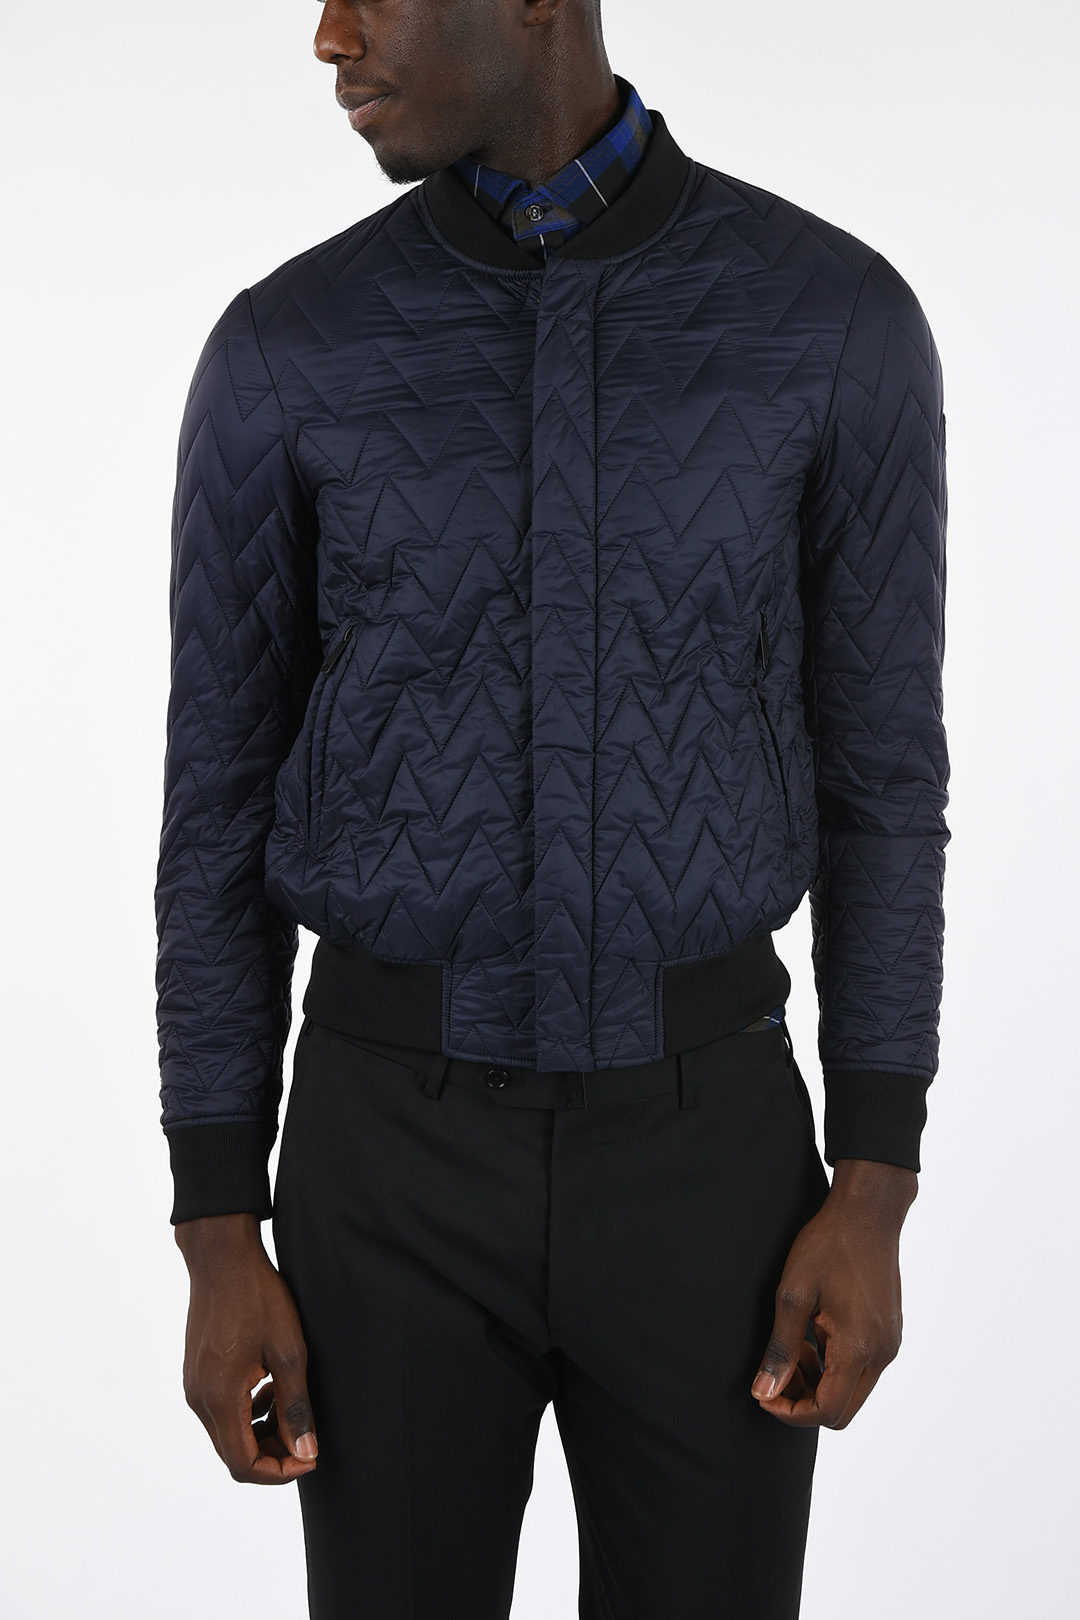 JEANS Waist Length Quilted Bomber men - Outlet